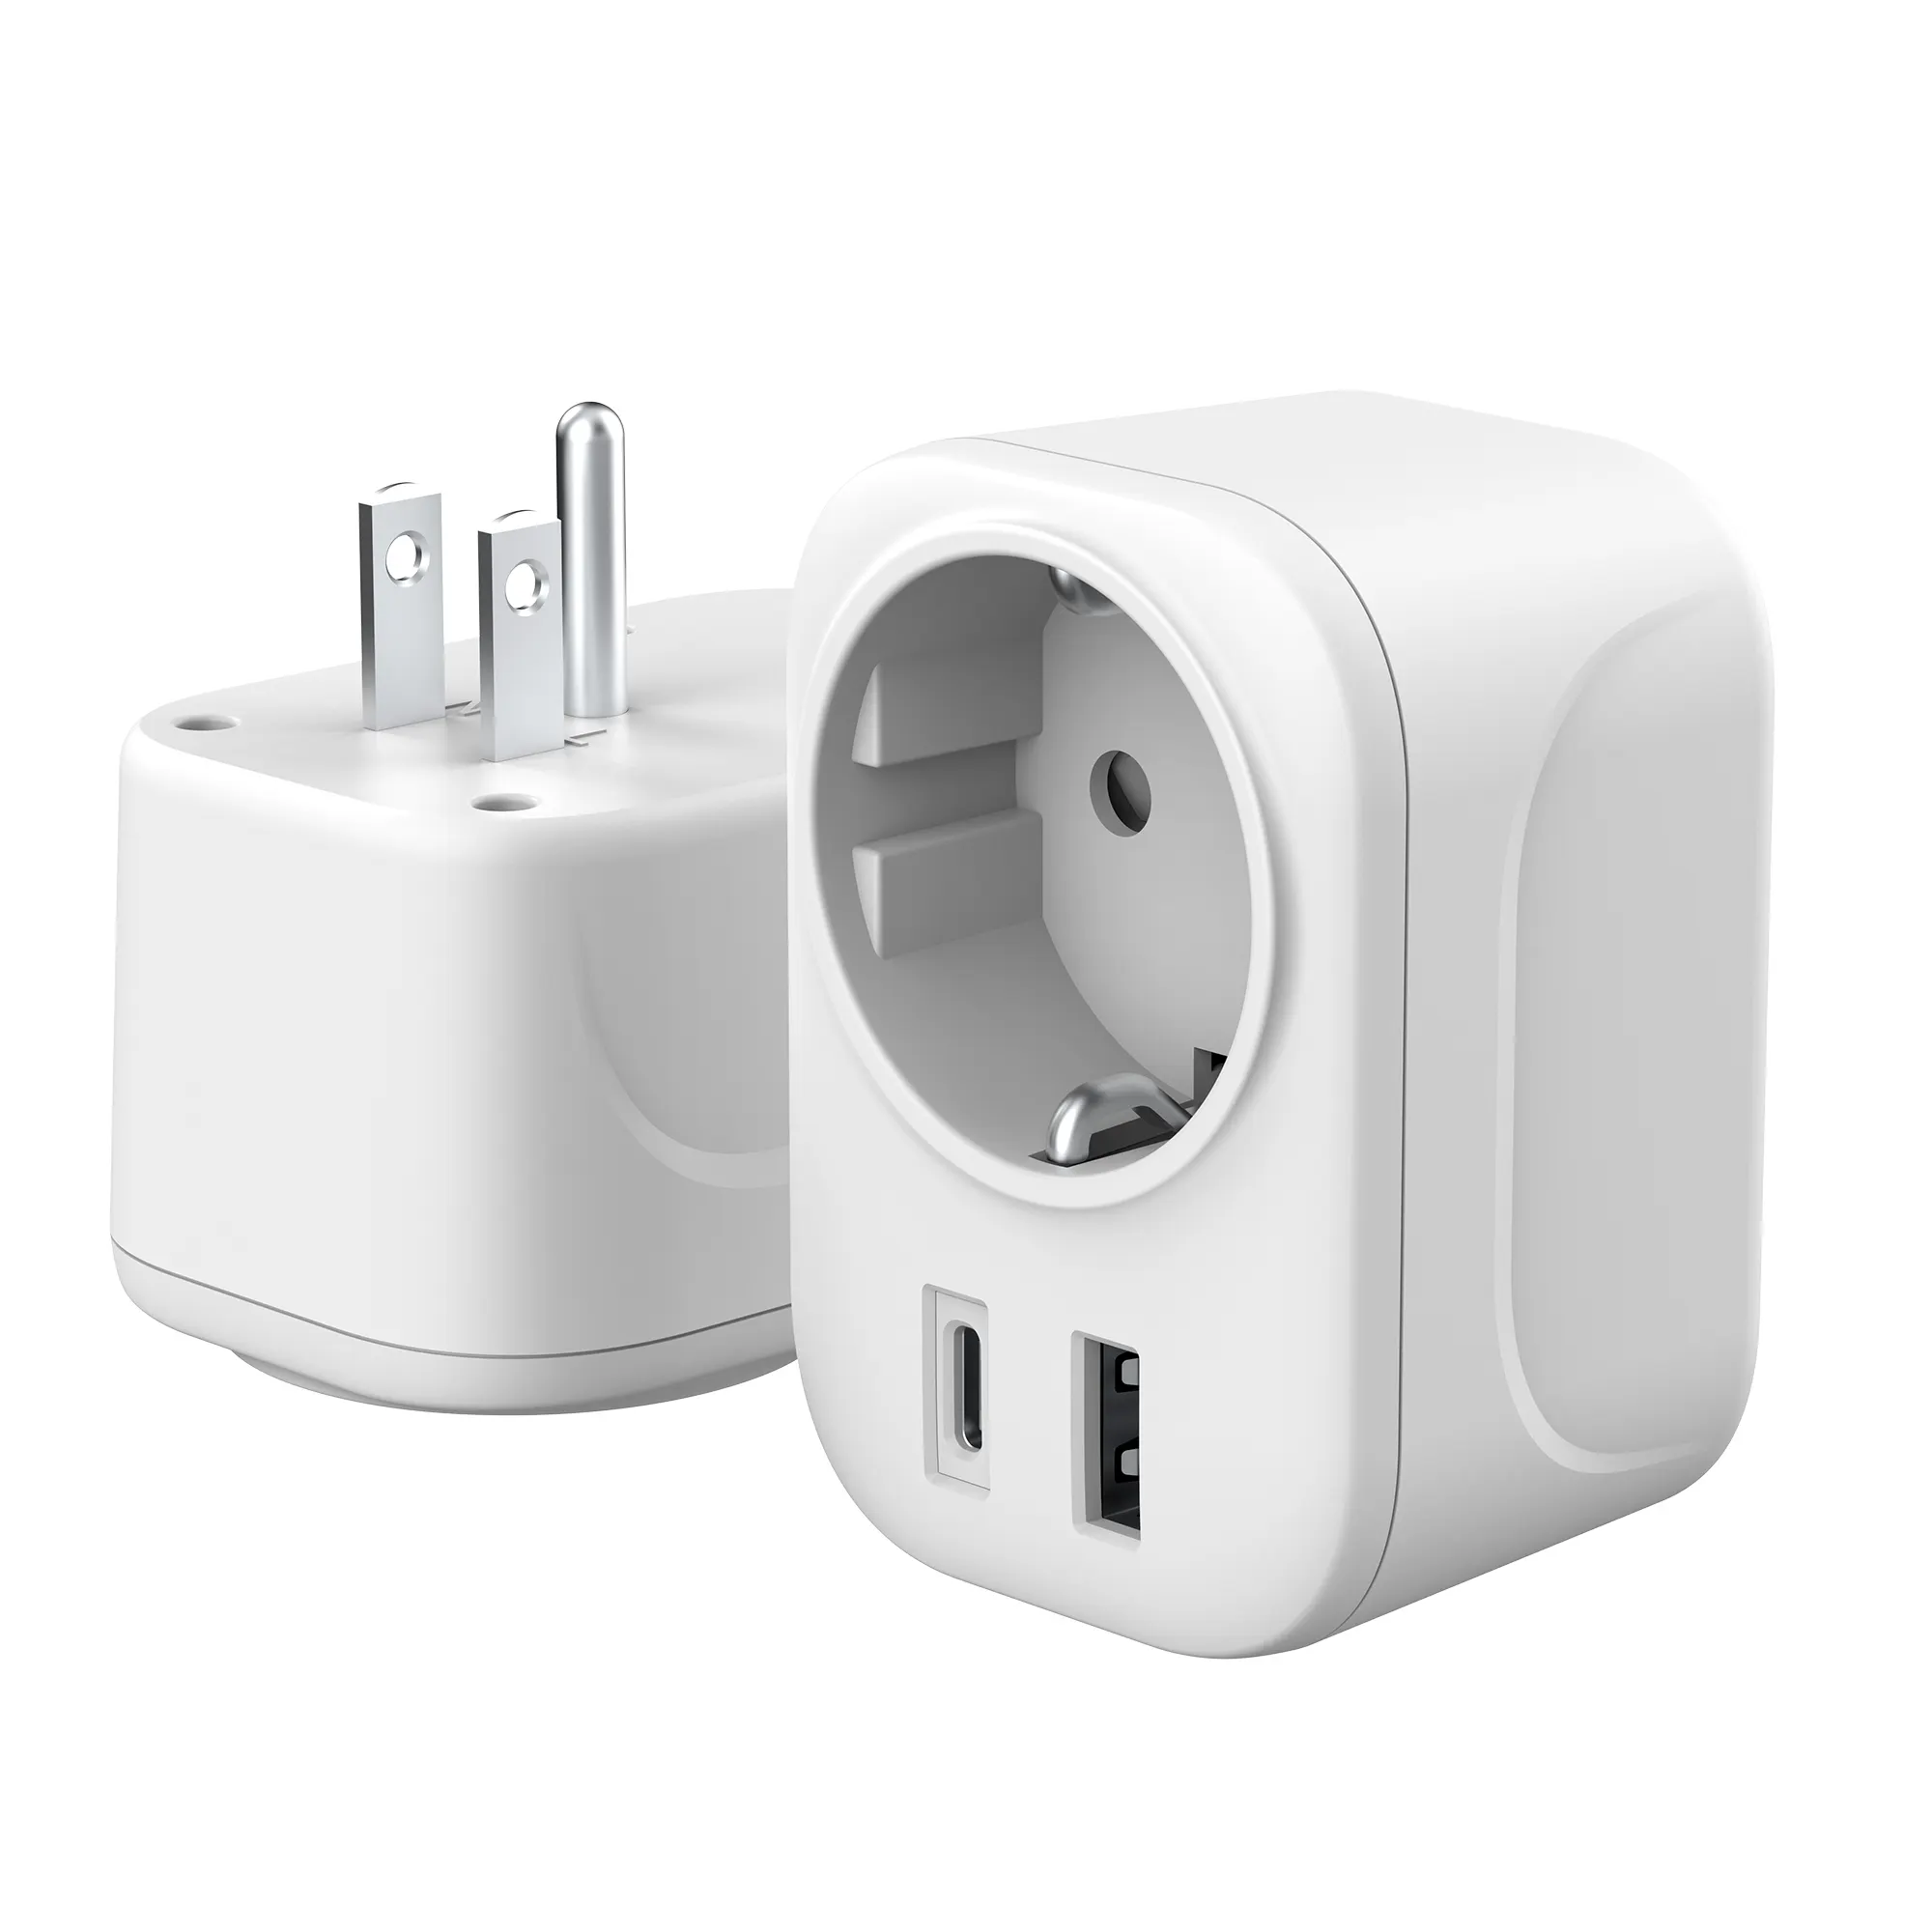 EU to US European Plug Adapter Converter for Europe UK EU US with USB C earthed CE ROHS FCC for travel gifts